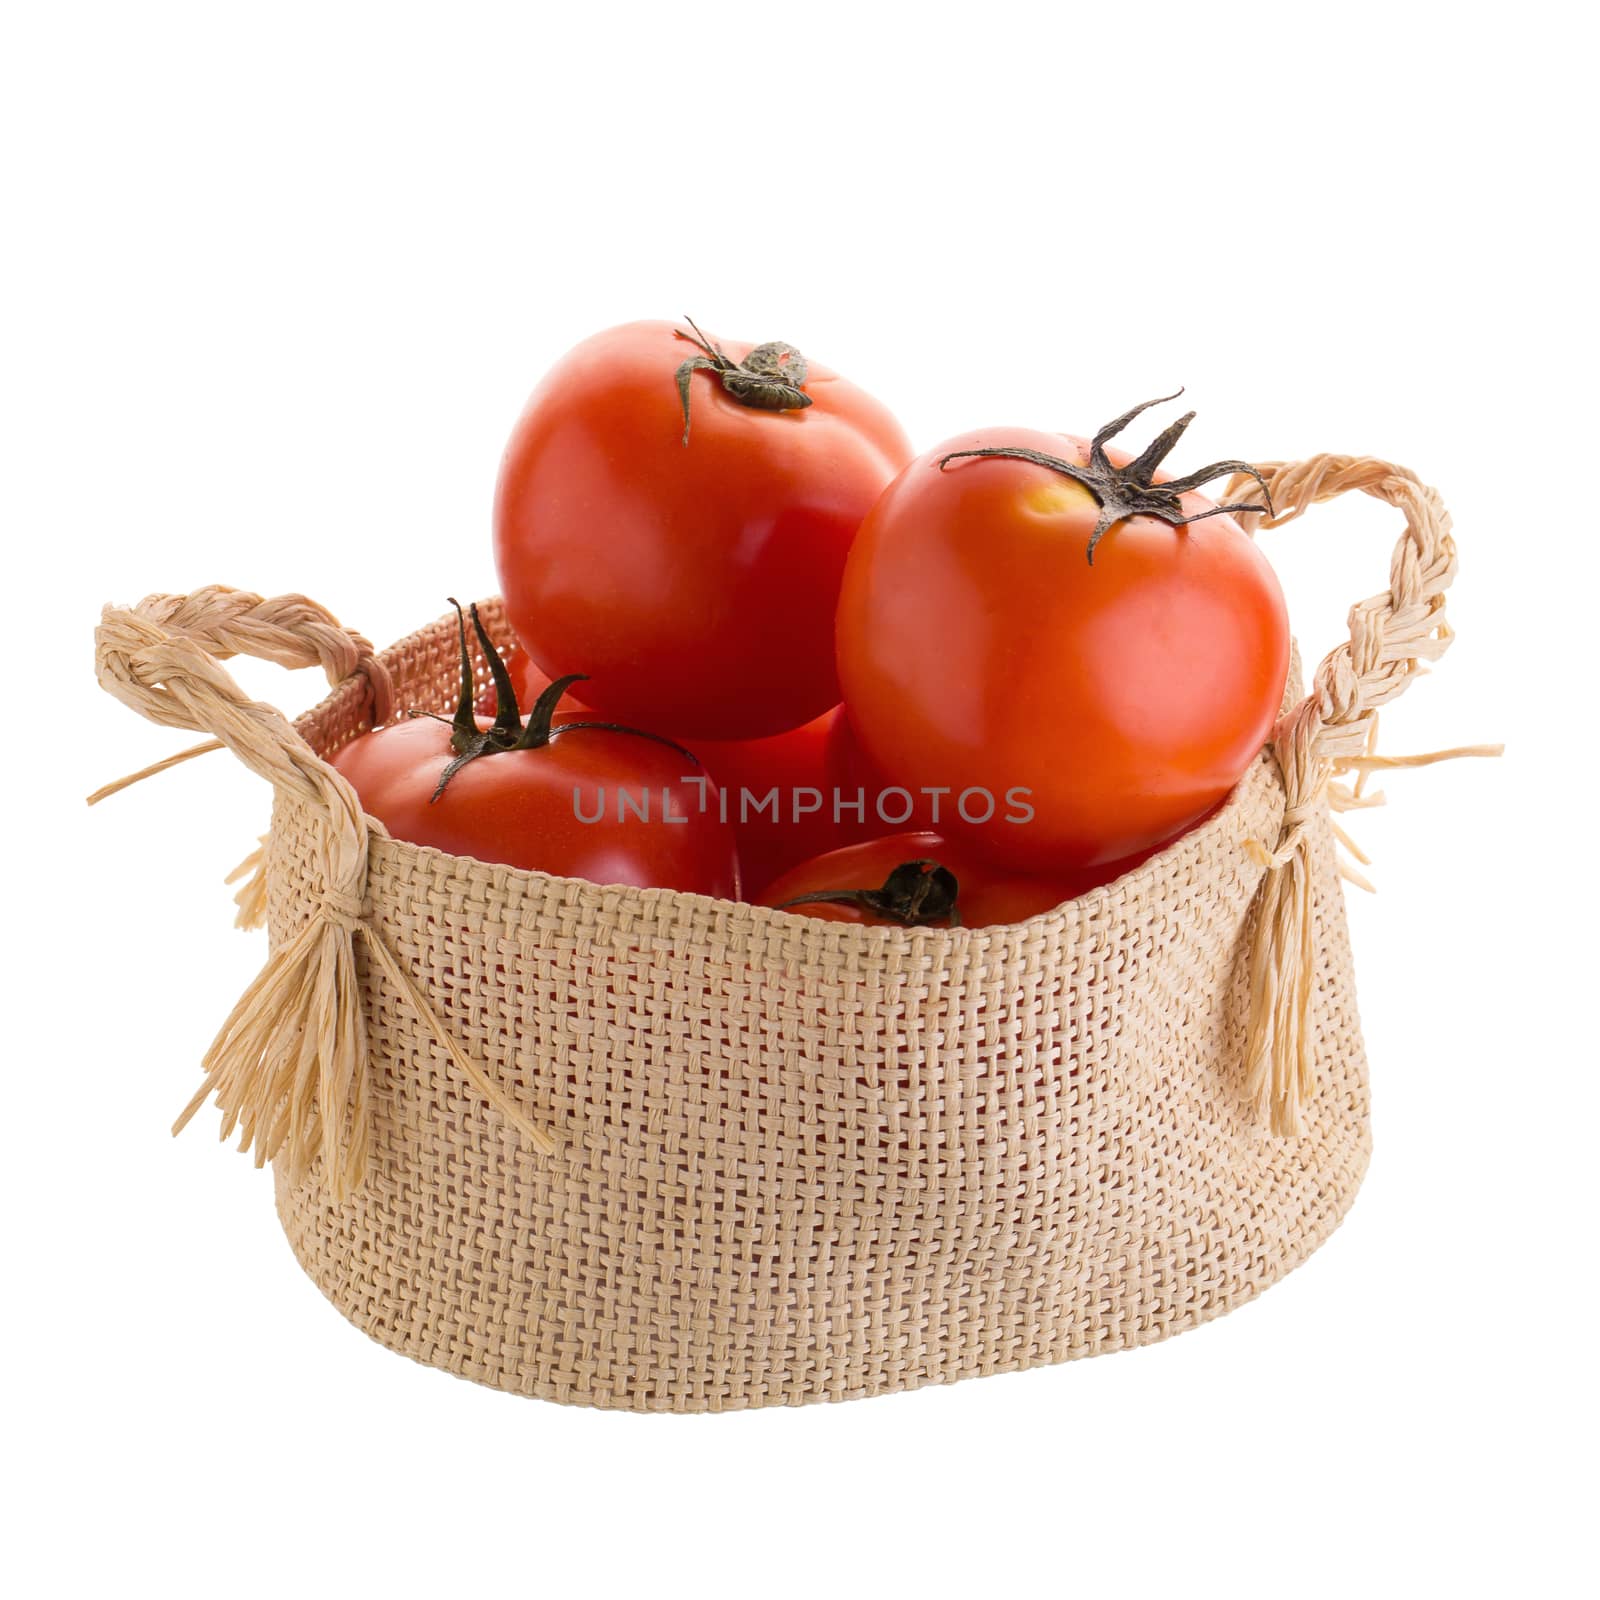 Tomato In the basket isolated on a white background by kaiskynet